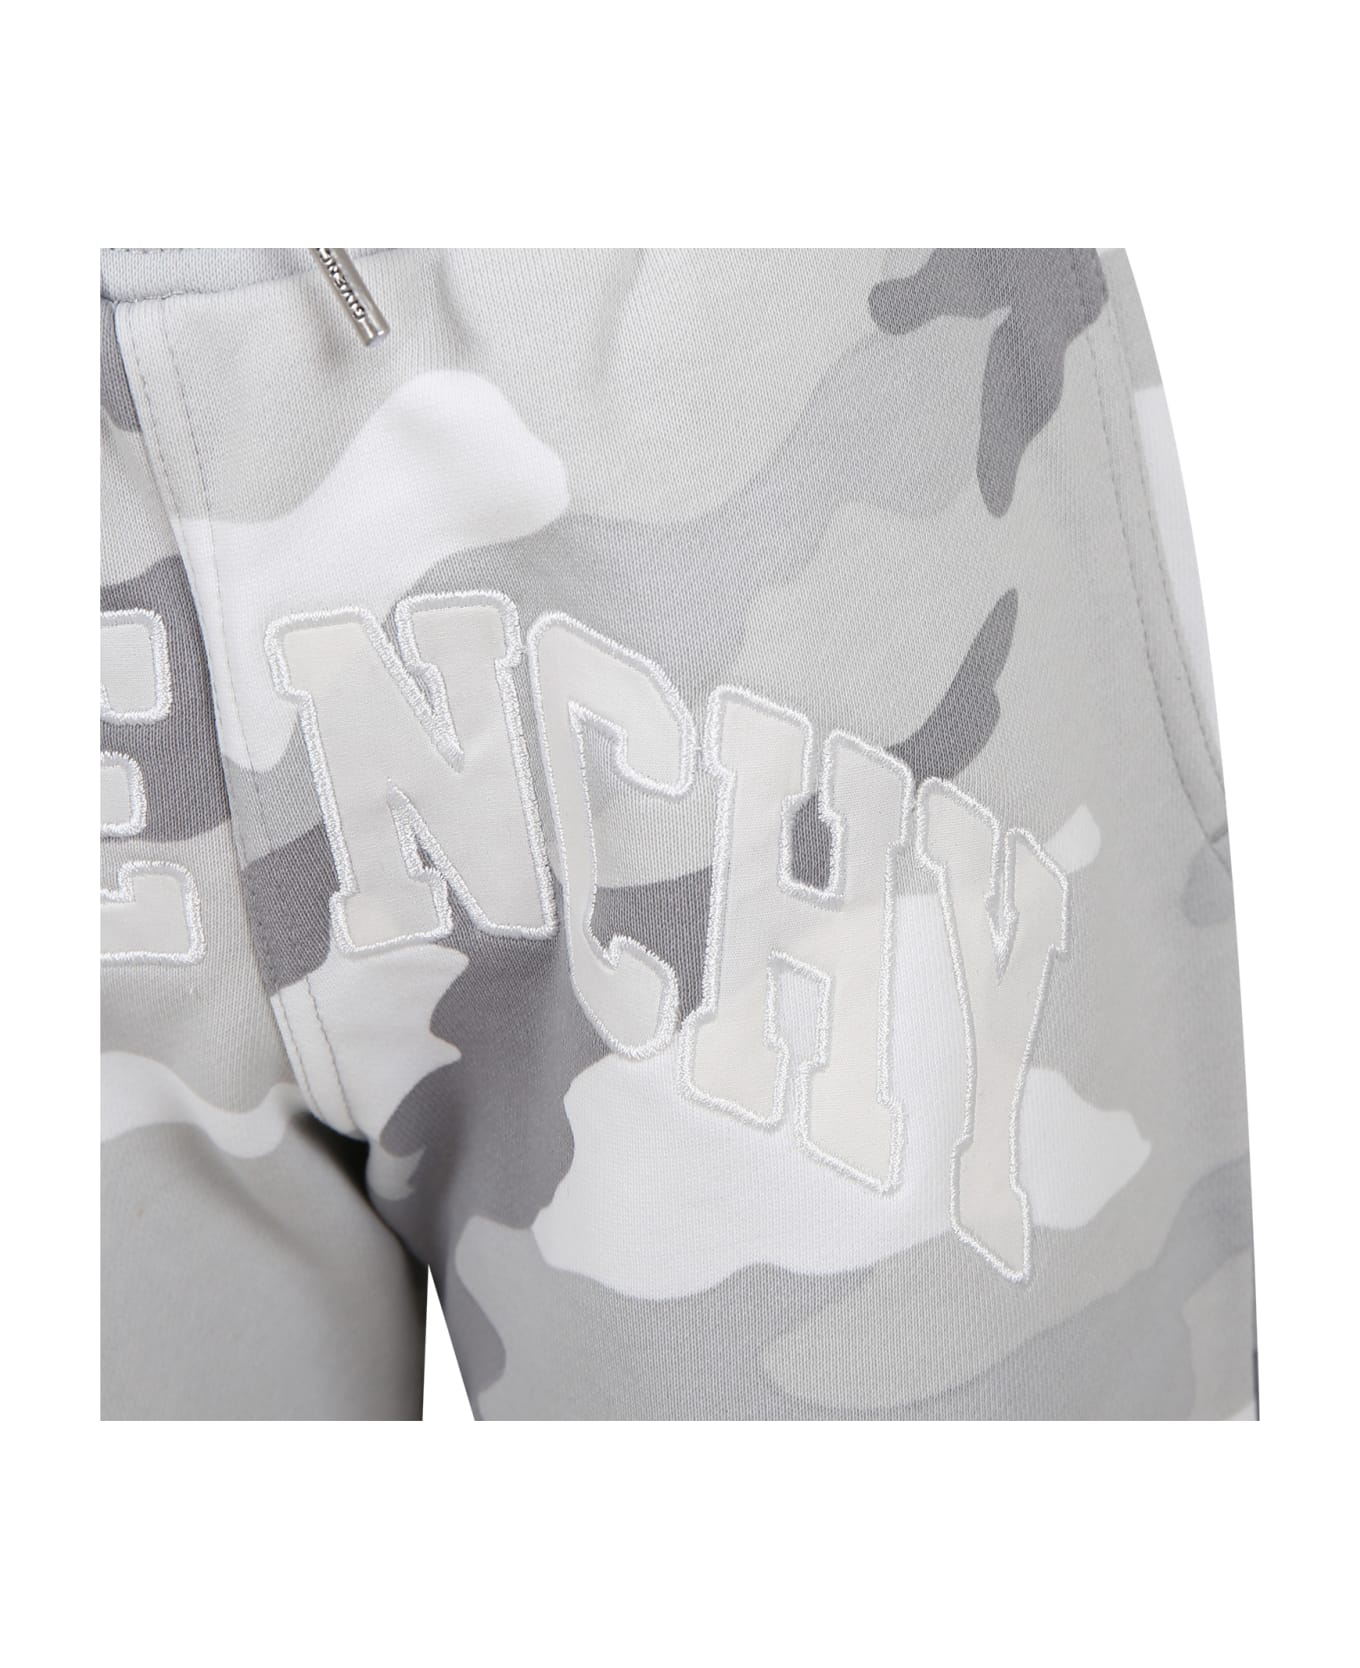 Givenchy Gray Trousers For Kids With Camouflage Pattern - Grey ボトムス